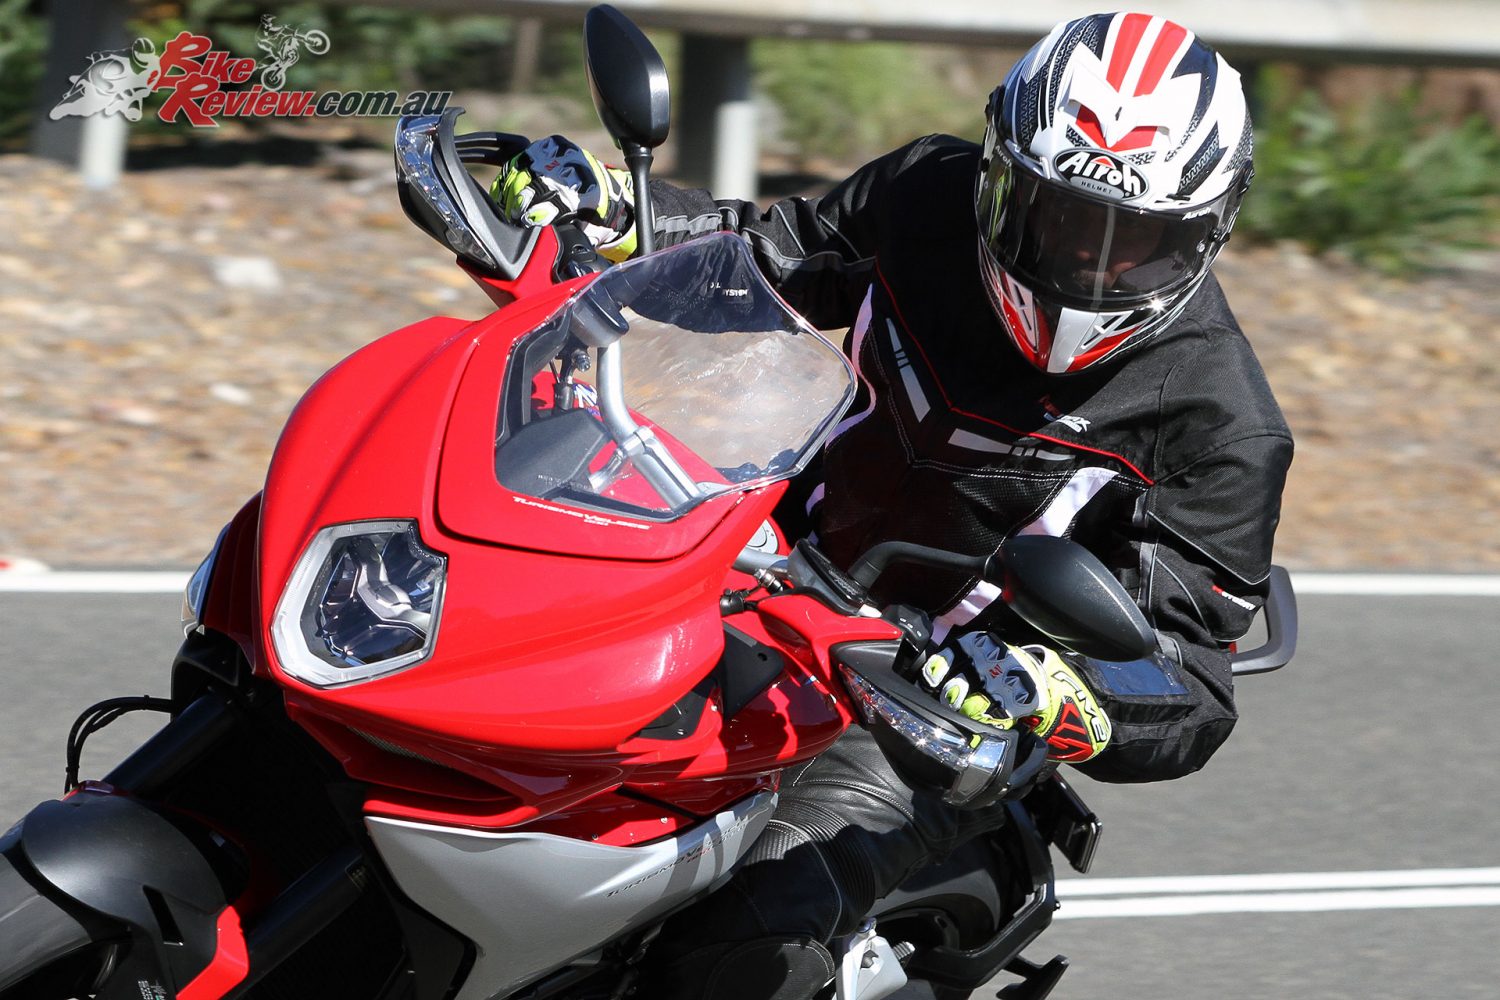 Five RFX1 Gloves on the MV Agusta Turismo Veloce Lusso